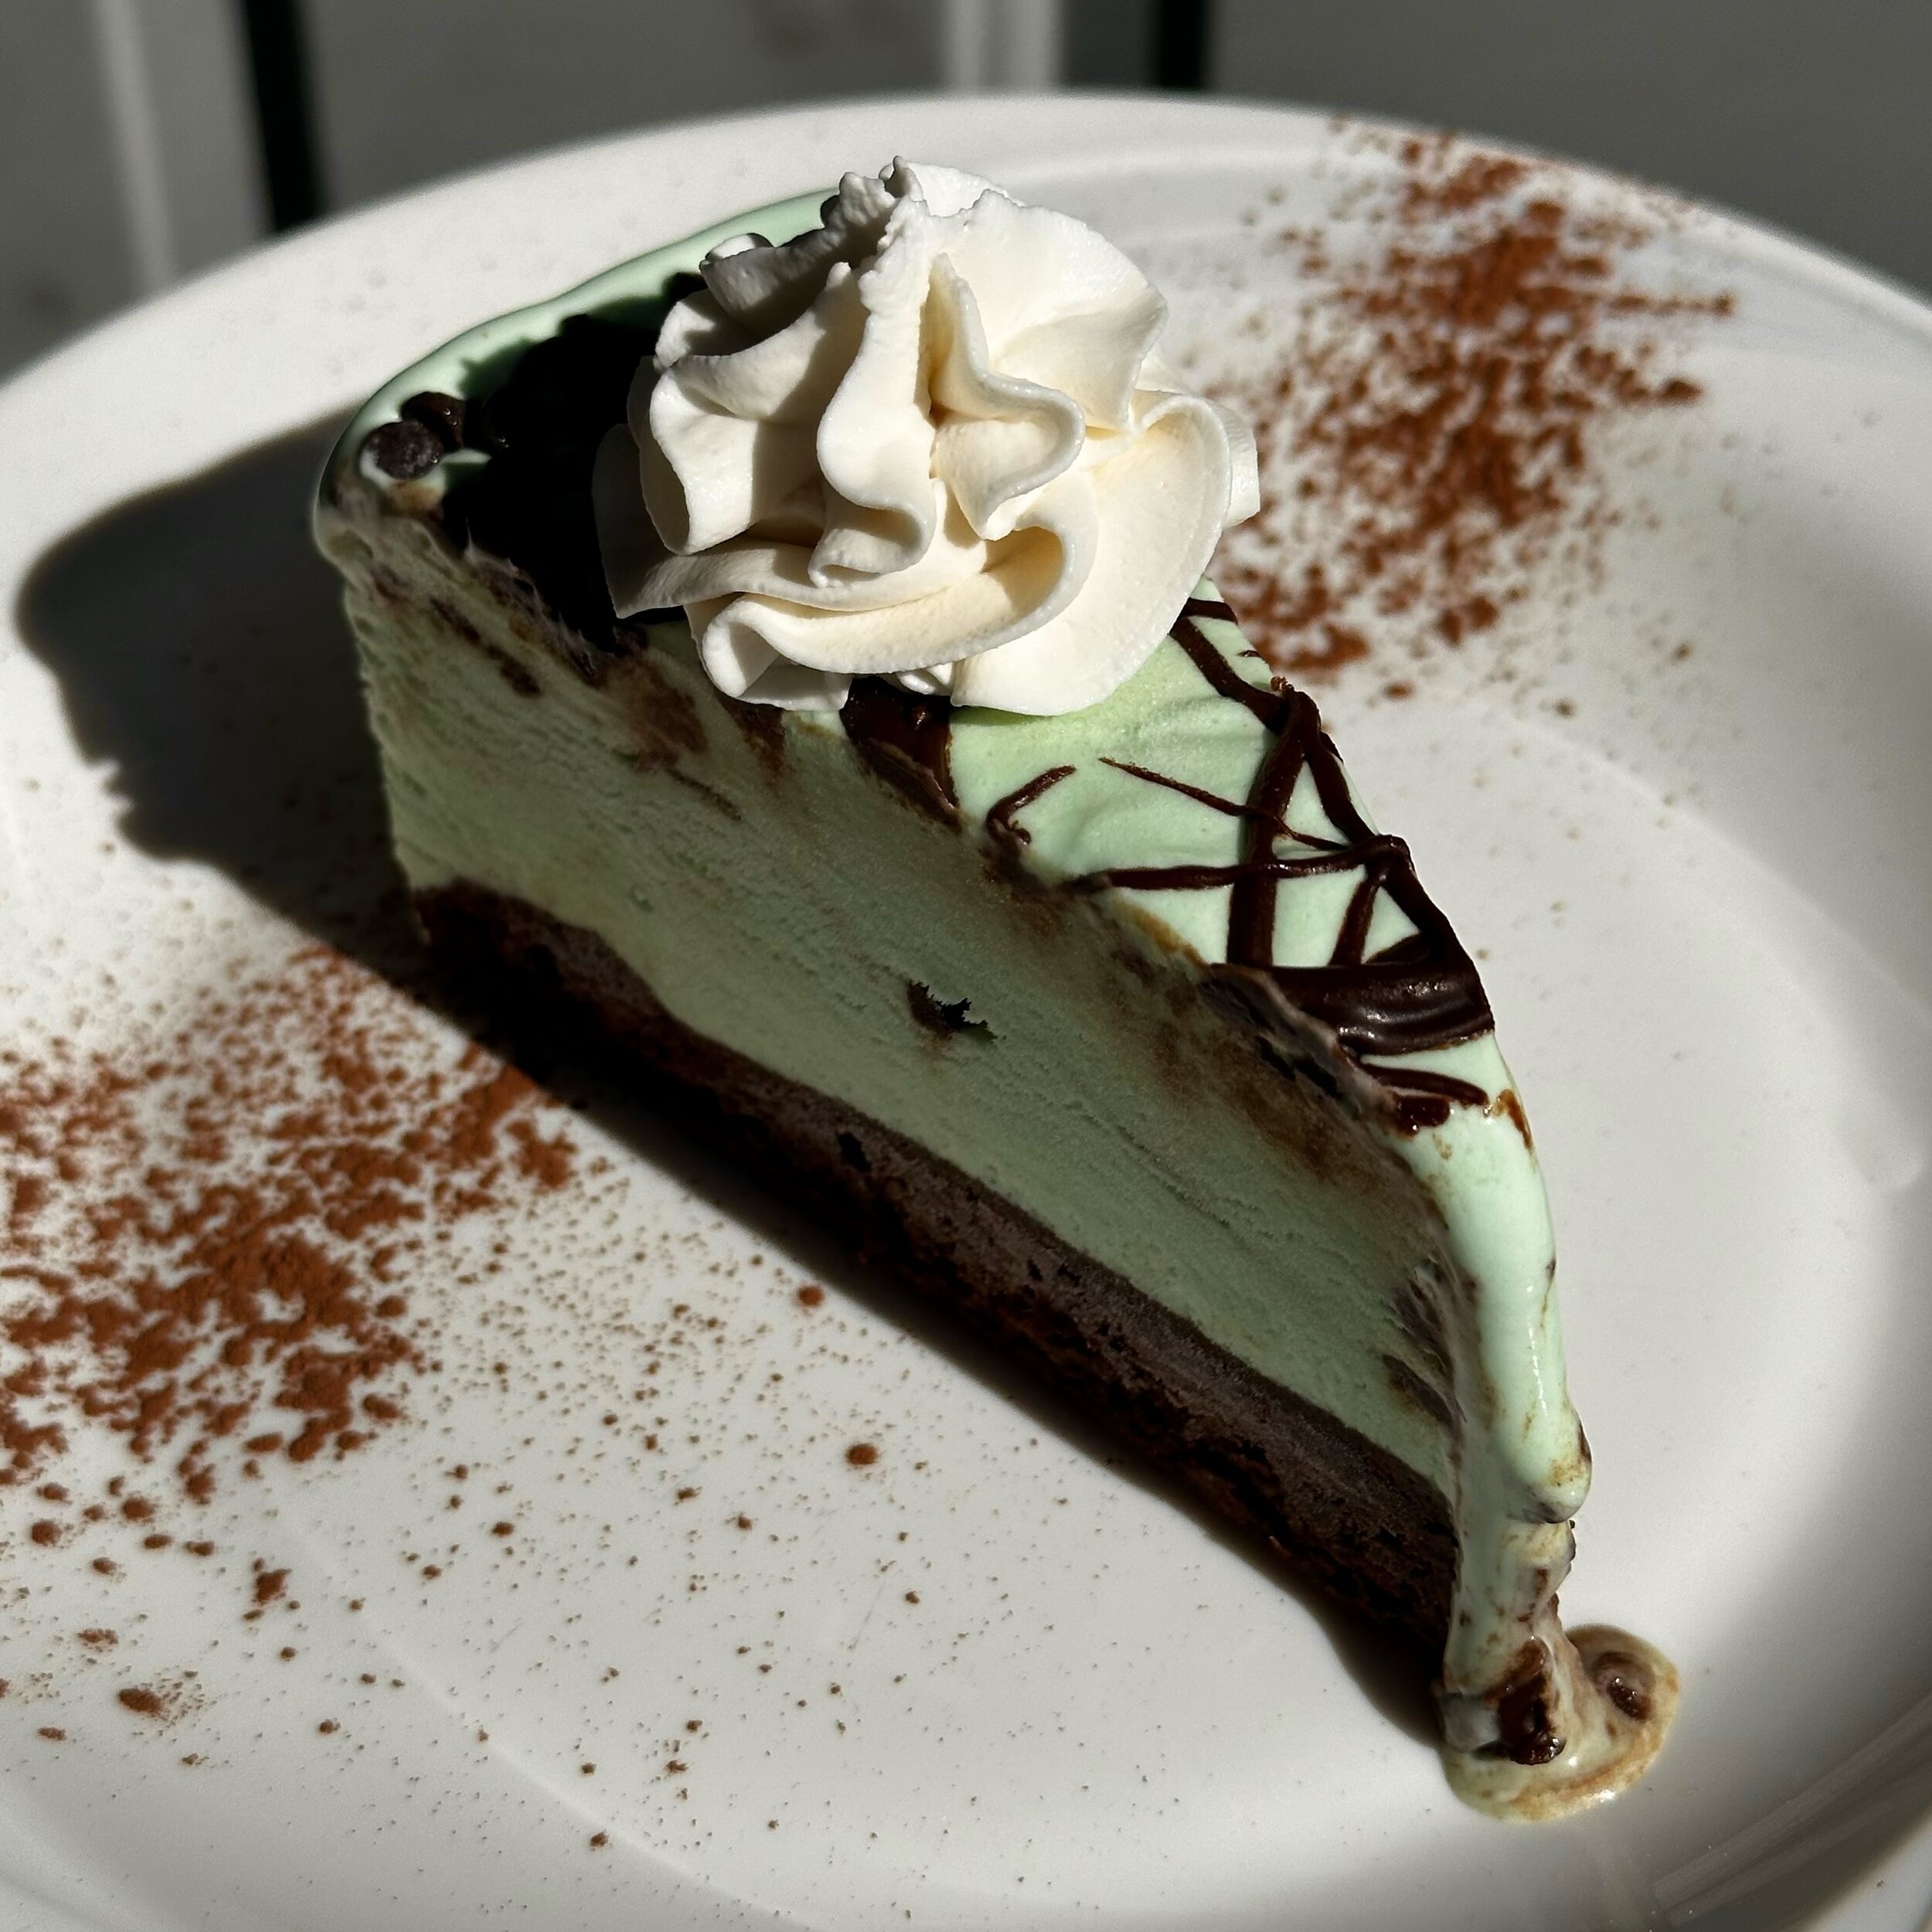 How we still have slices of this I do not know. 😲
Mint chocolate brownies ice cream cake